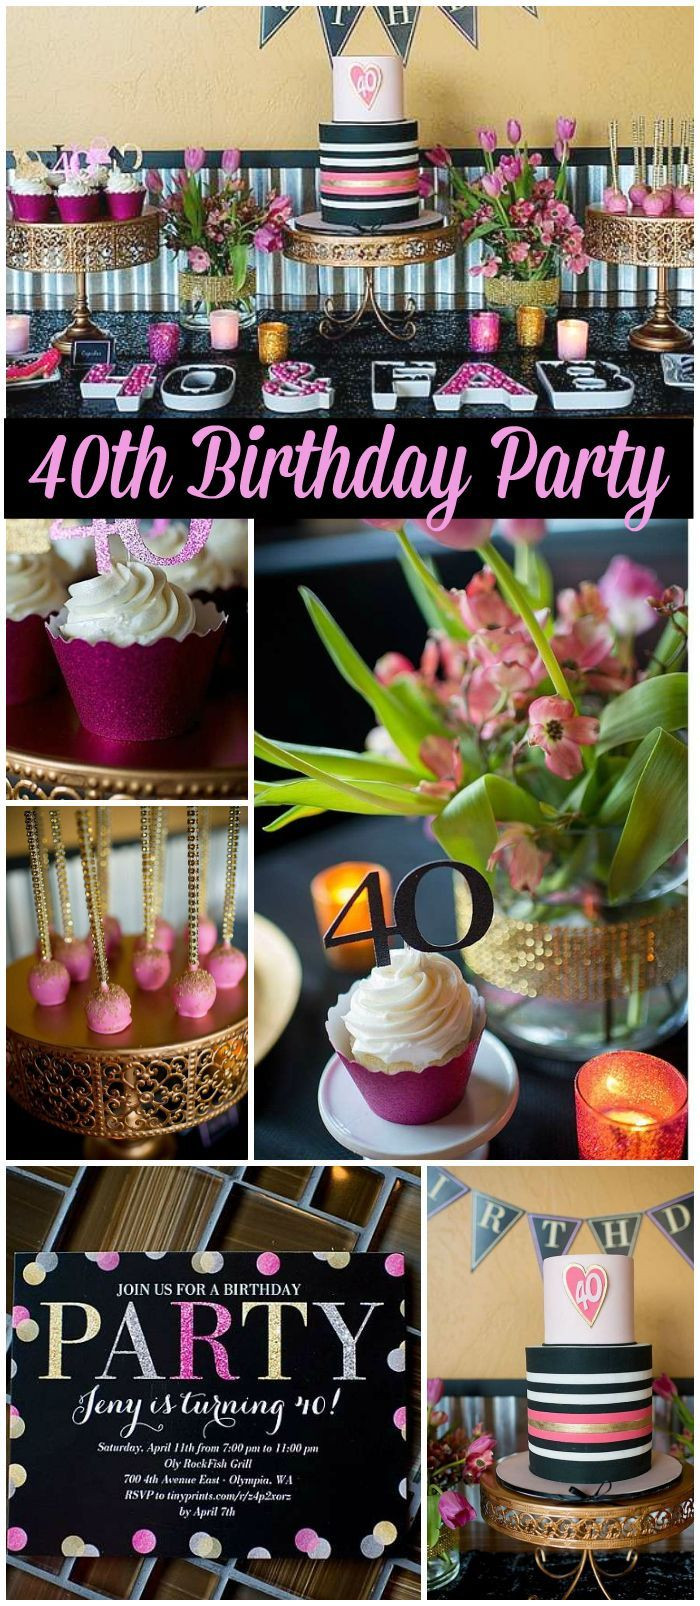 40th Birthday Party Decorations
 Check out this glamorous 40th birthday party with stylish